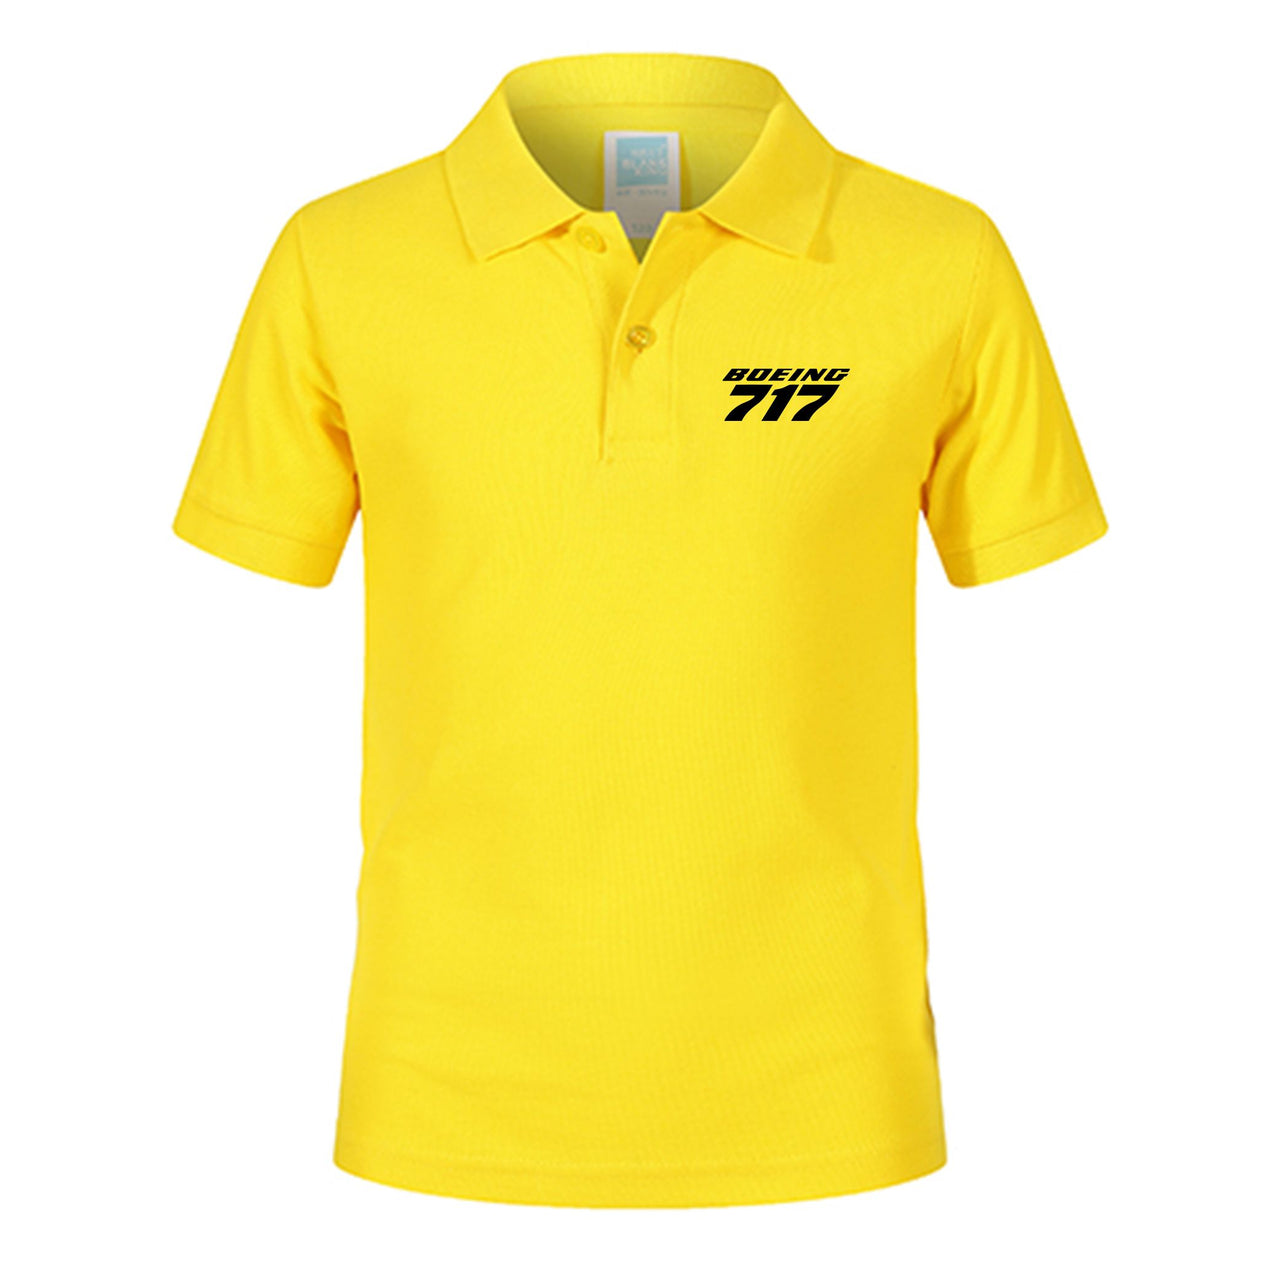 Boeing 717 & Text Designed Children Polo T-Shirts